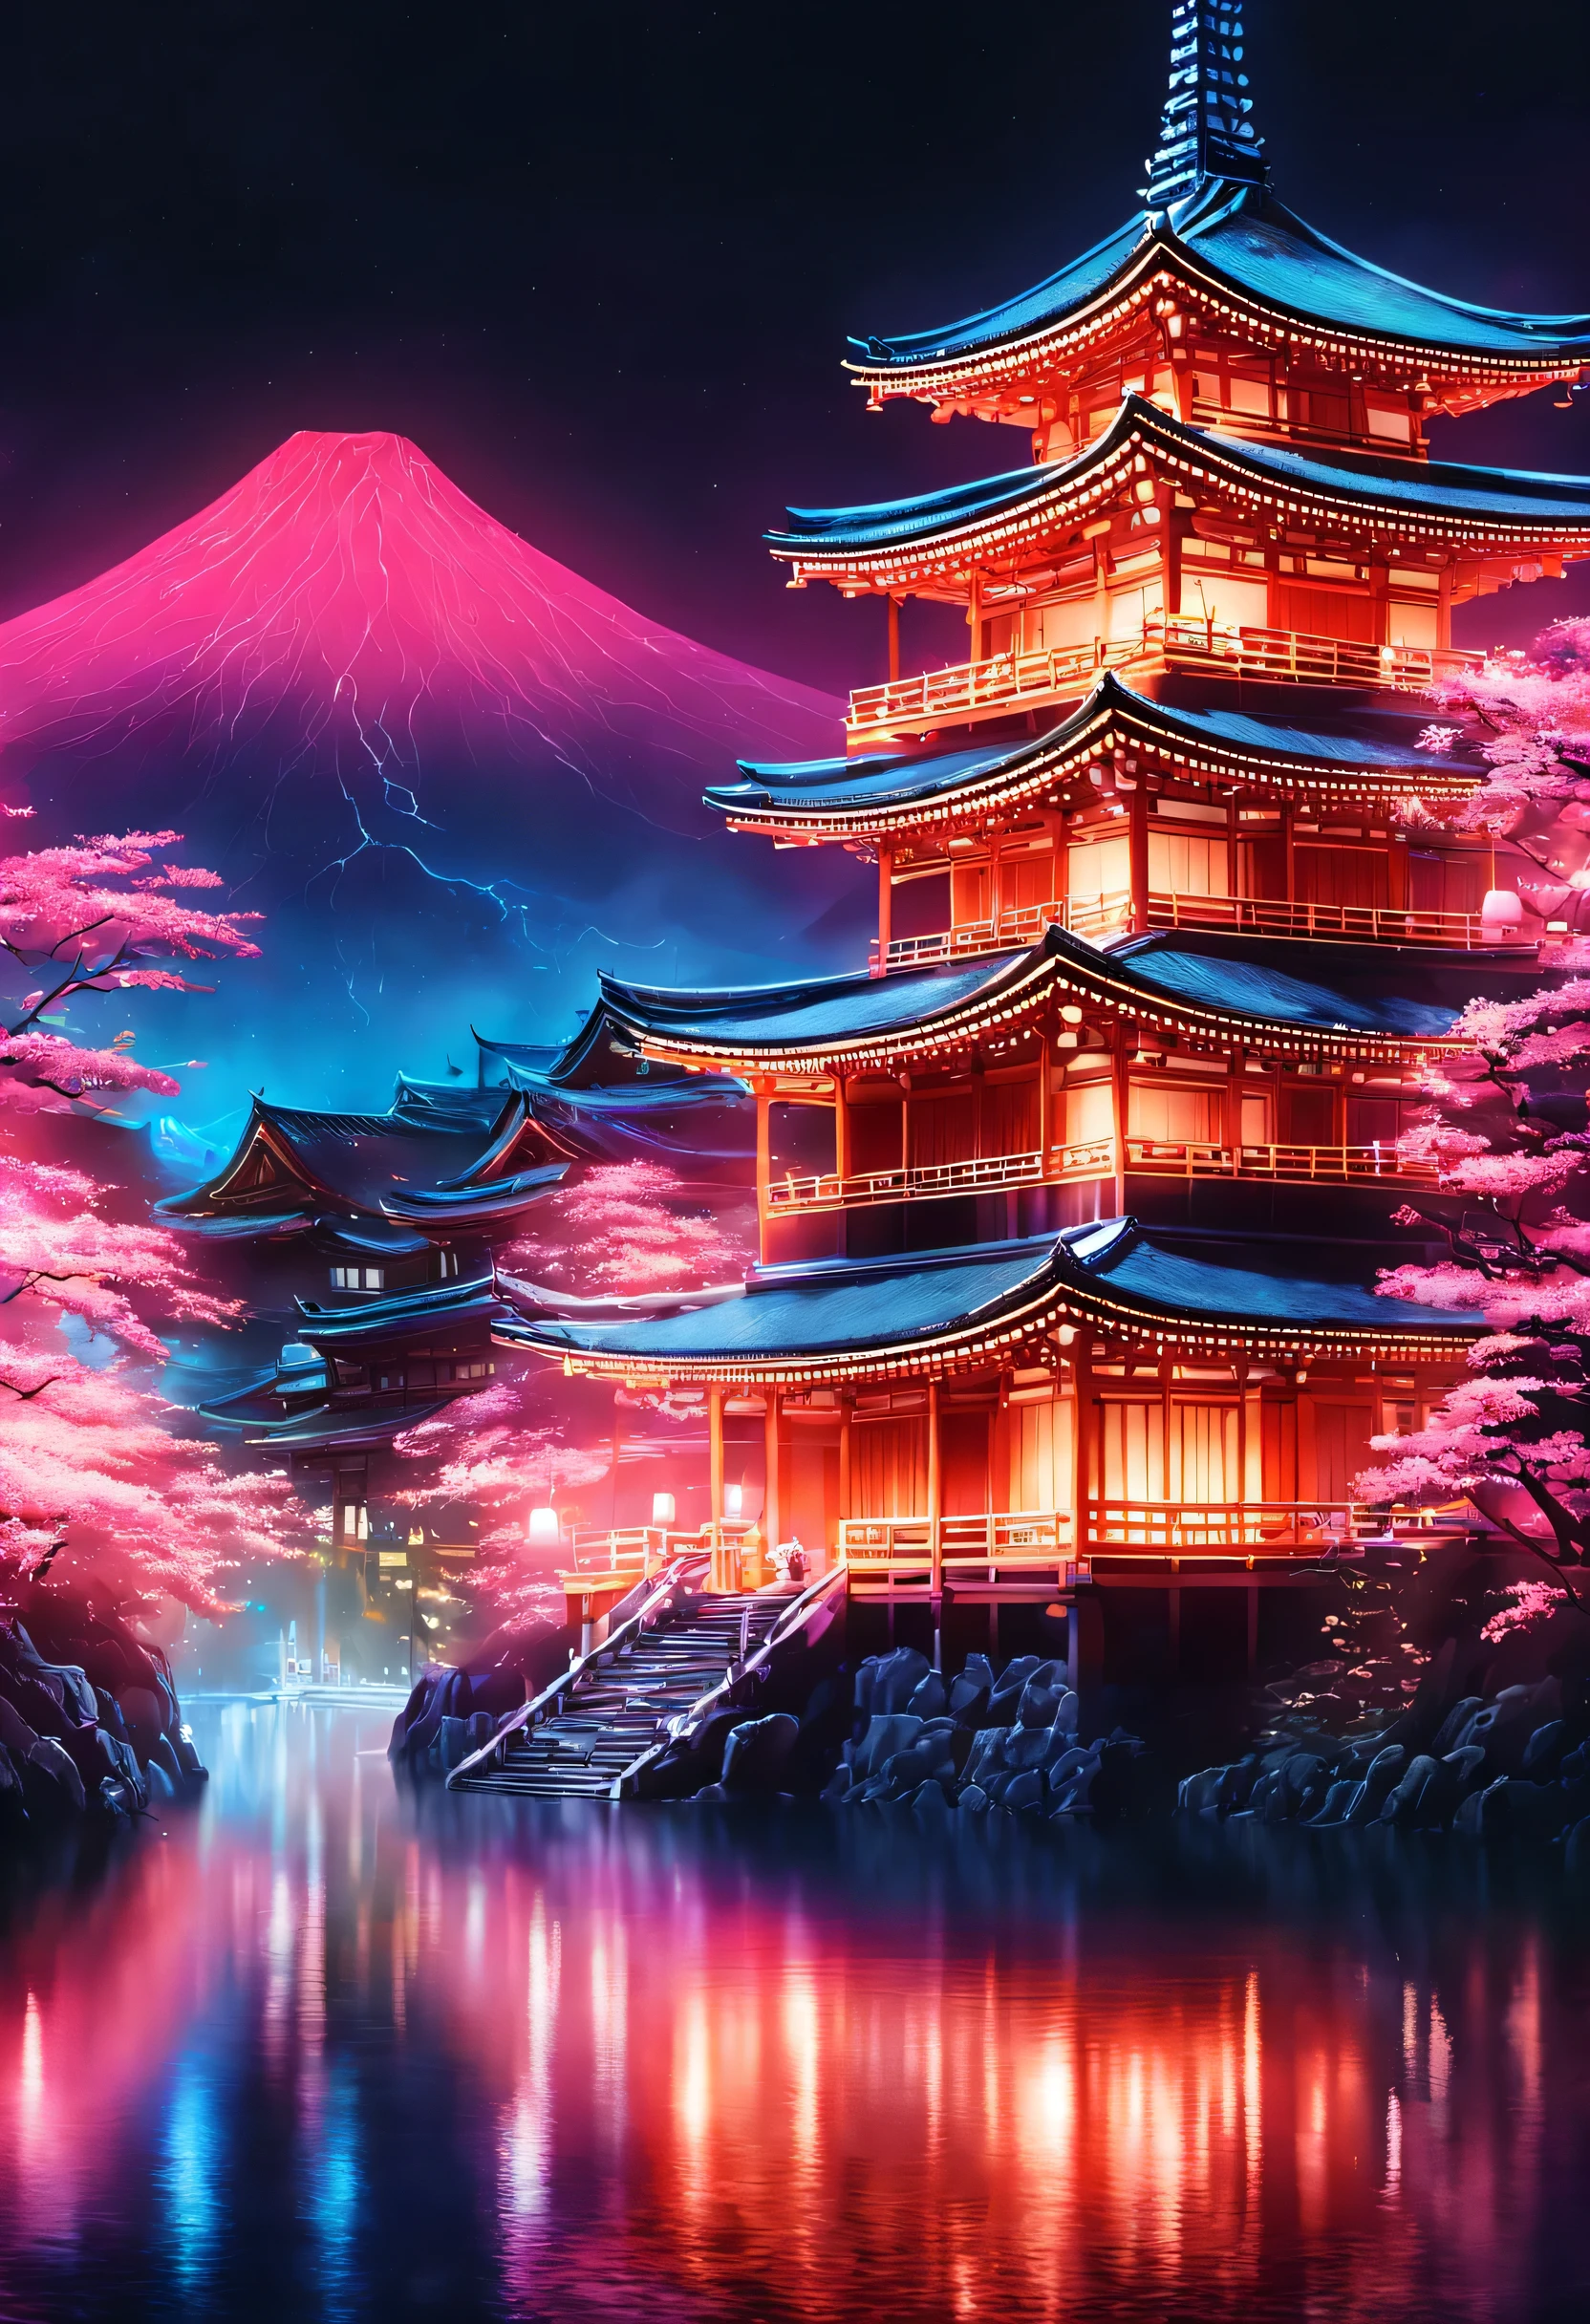 The aesthetics of Vaporwave,ネオンカラーで描くCountriesさん,Kyoto,Kiyomizu temple,Around Ninenzaka,Countries,最高にかわいいCountriesさん,kimono,Kiyomizu temple周辺を歩いているCountriesさん,beautiful,rich colors,flash,Very flash,Cast colorful spells,Draw in neon colors on a dark background,Fusion of good old Japanese scenery and modern art,Pop Illustration,posters,perfect composition,Design that expresses Japan,works of art